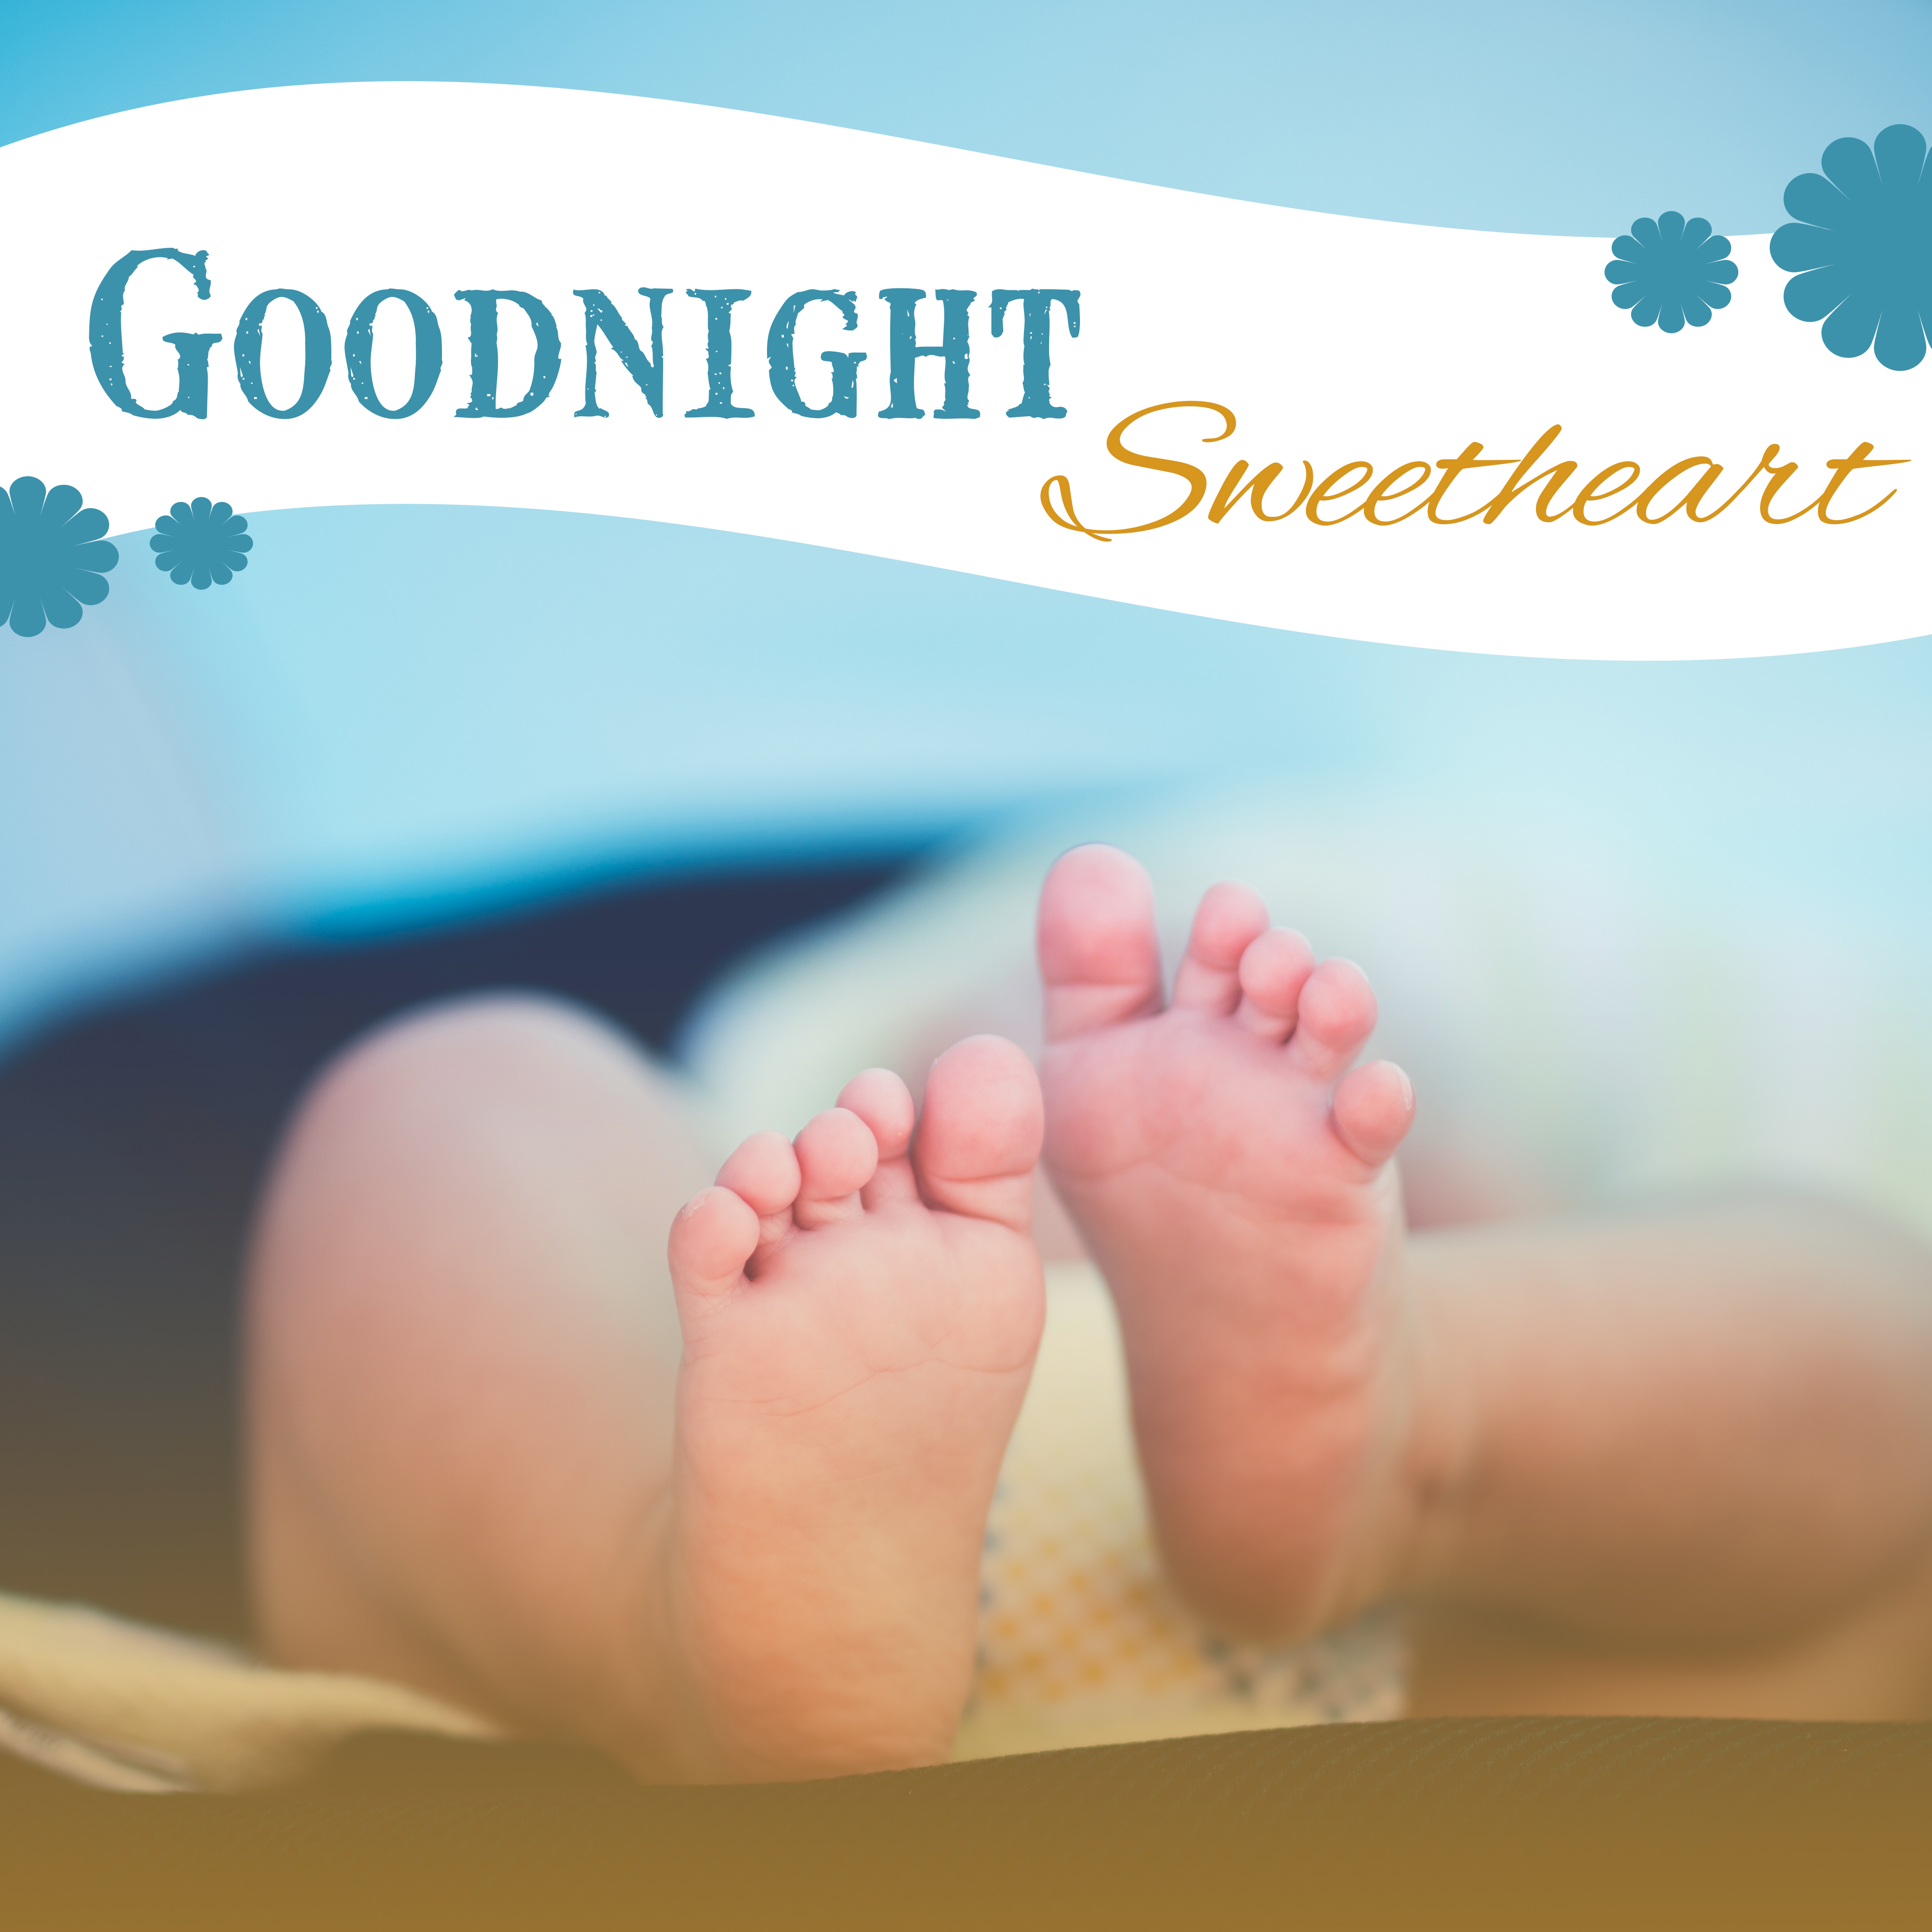 Goodnight Sweetheart  Healing Lullabies for Baby, Pure Sleep, Bedtime, Restful, Calming Melodies to Bed, Peaceful Dreams, Quiet Child